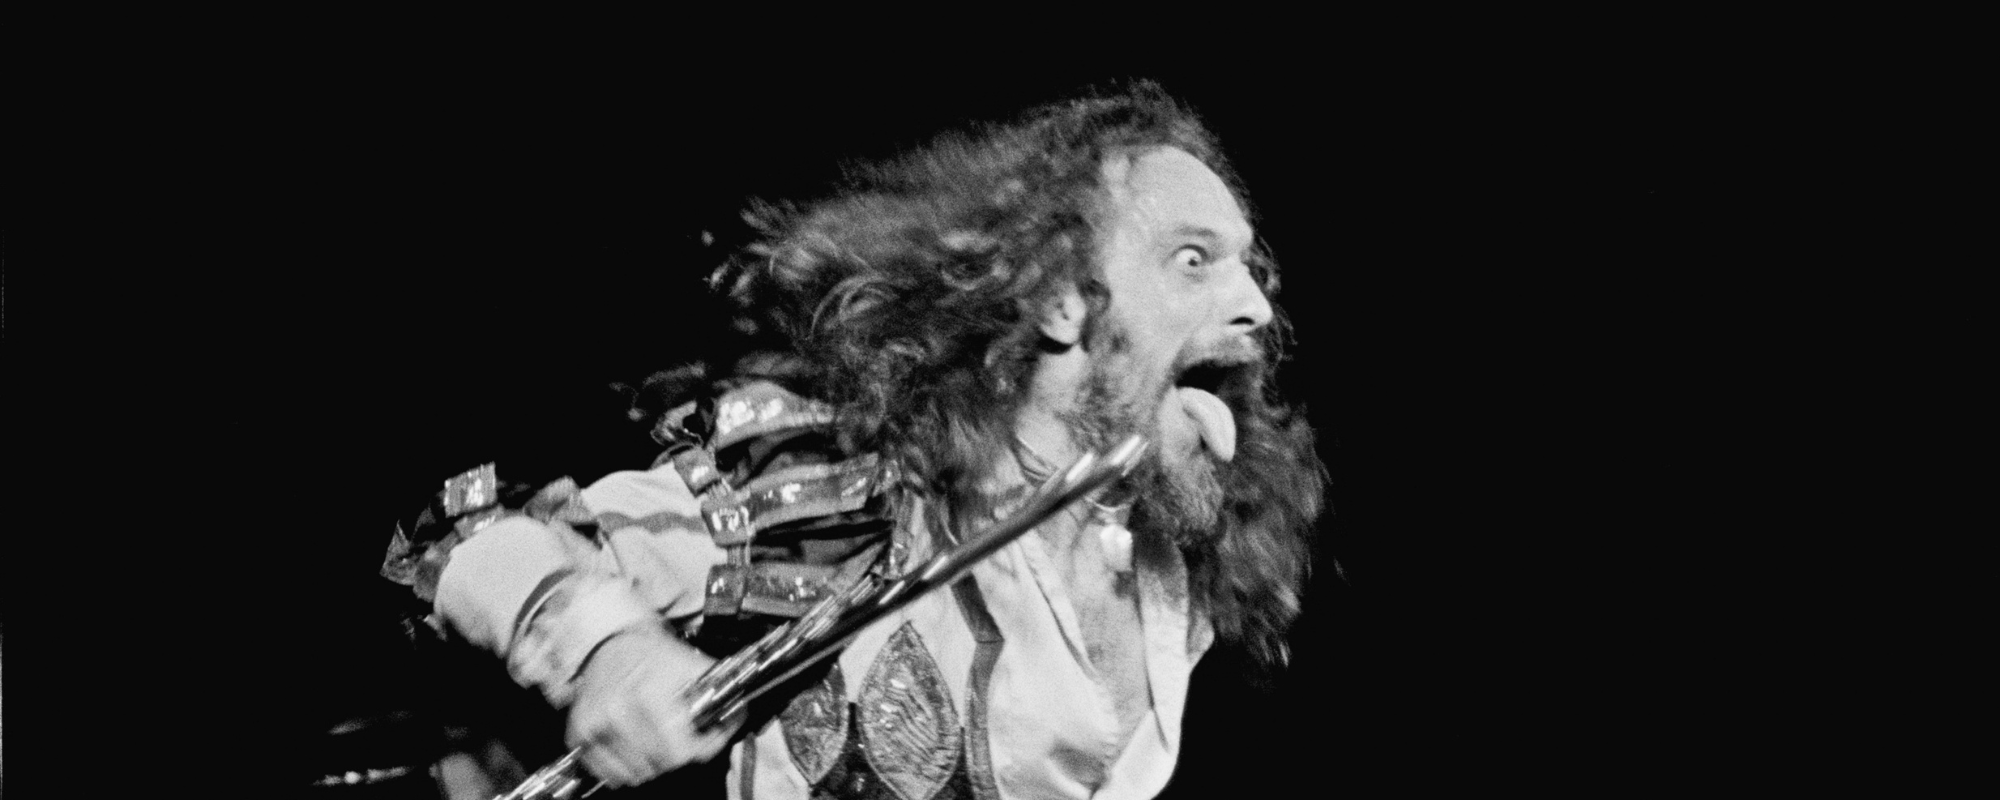 10 Jethro Tull Songs That Will Turn Old Haters into New Fans